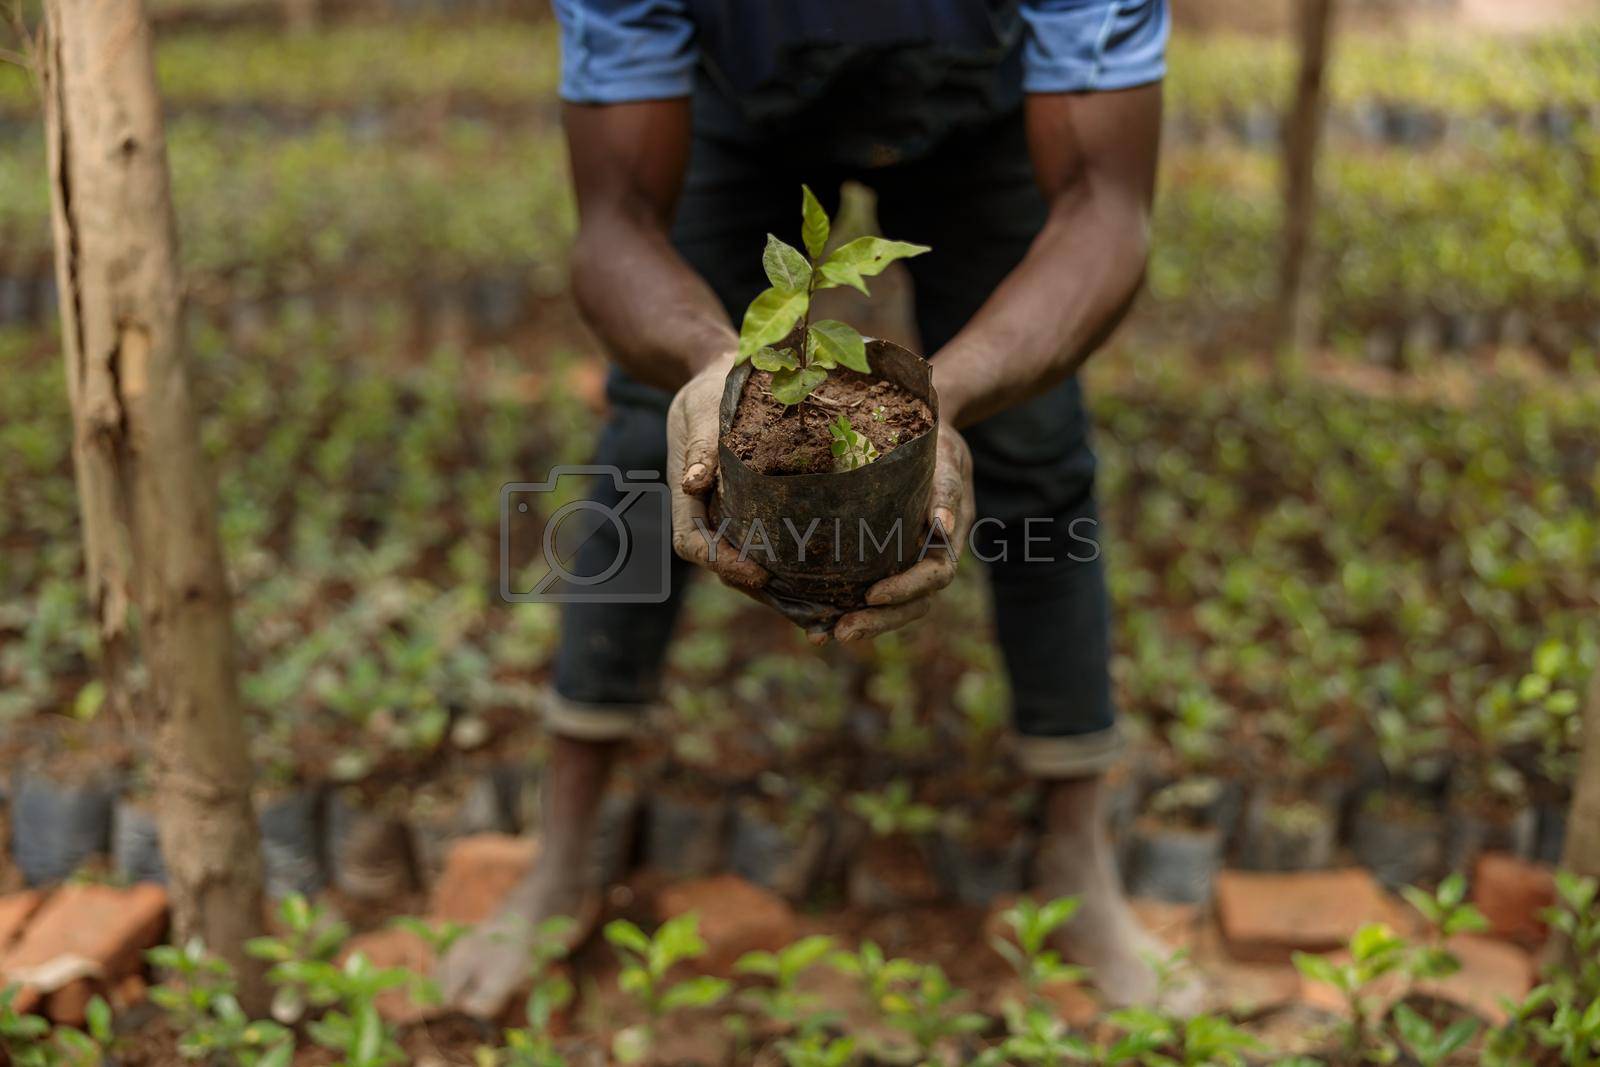 Royalty free image of African American farm worker planting coffee sprout by Yaroslav_astakhov